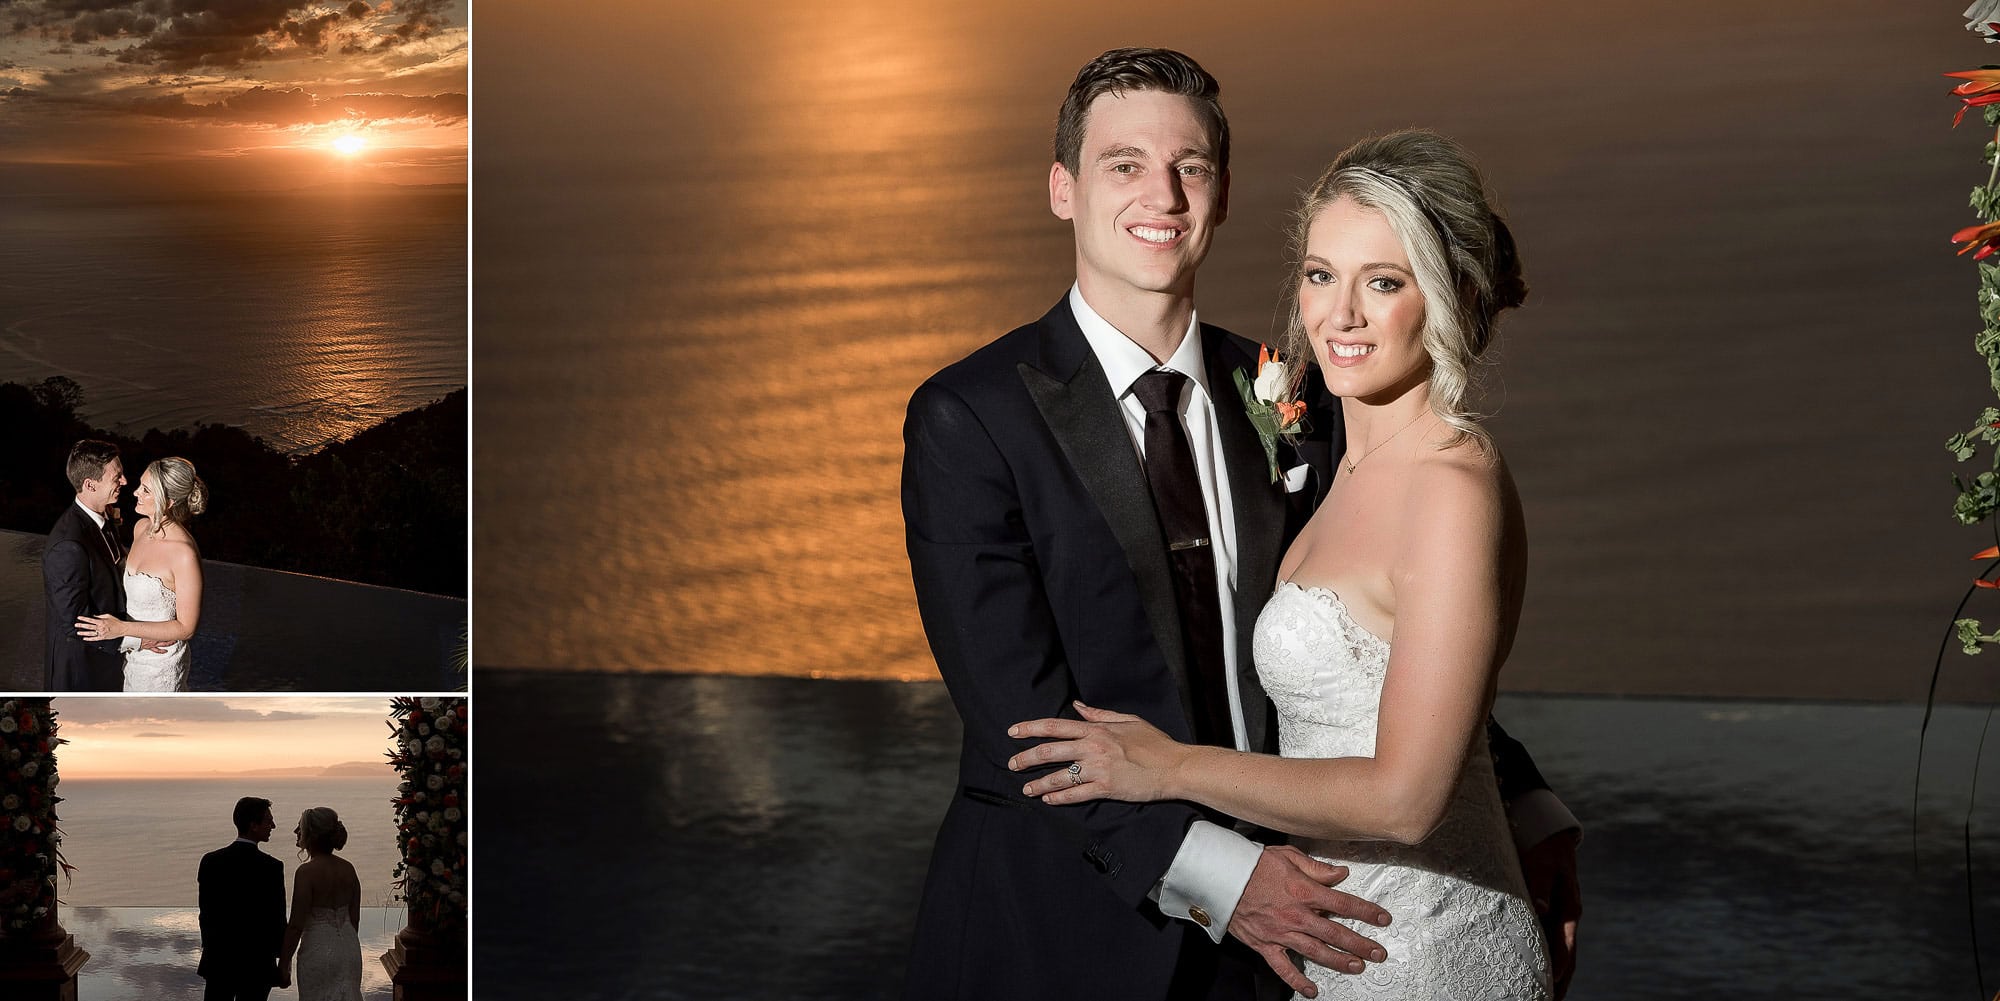 Portraits of the bride and groom with the spectacular sunset!